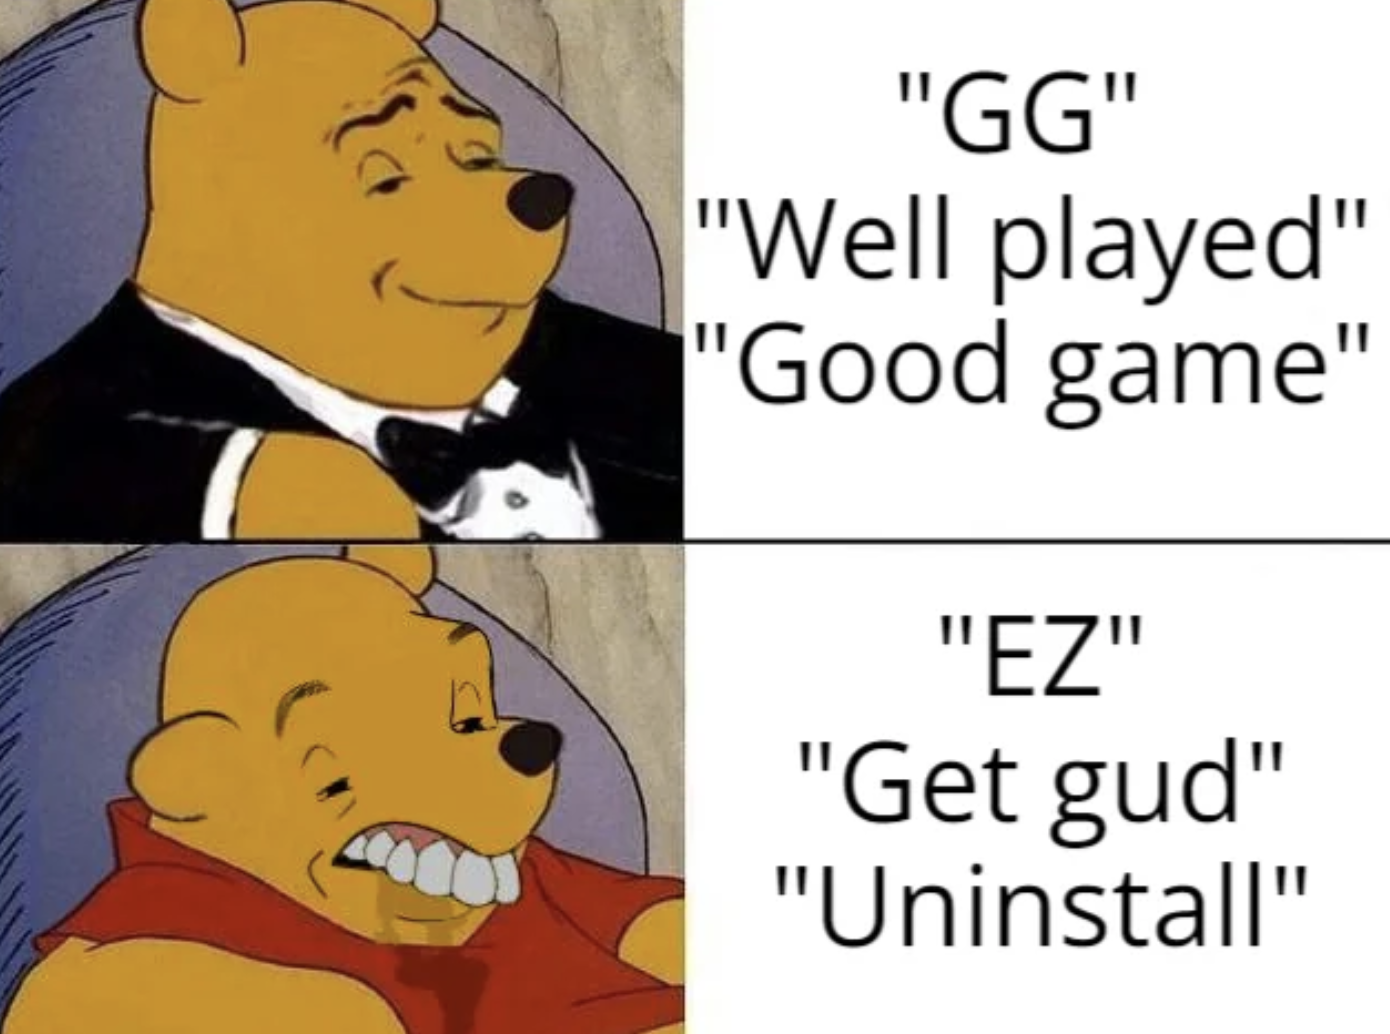 winnie pooh android meme - "Gg" "Well played" "Good game" "Ez" "Get gud" "Uninstall"